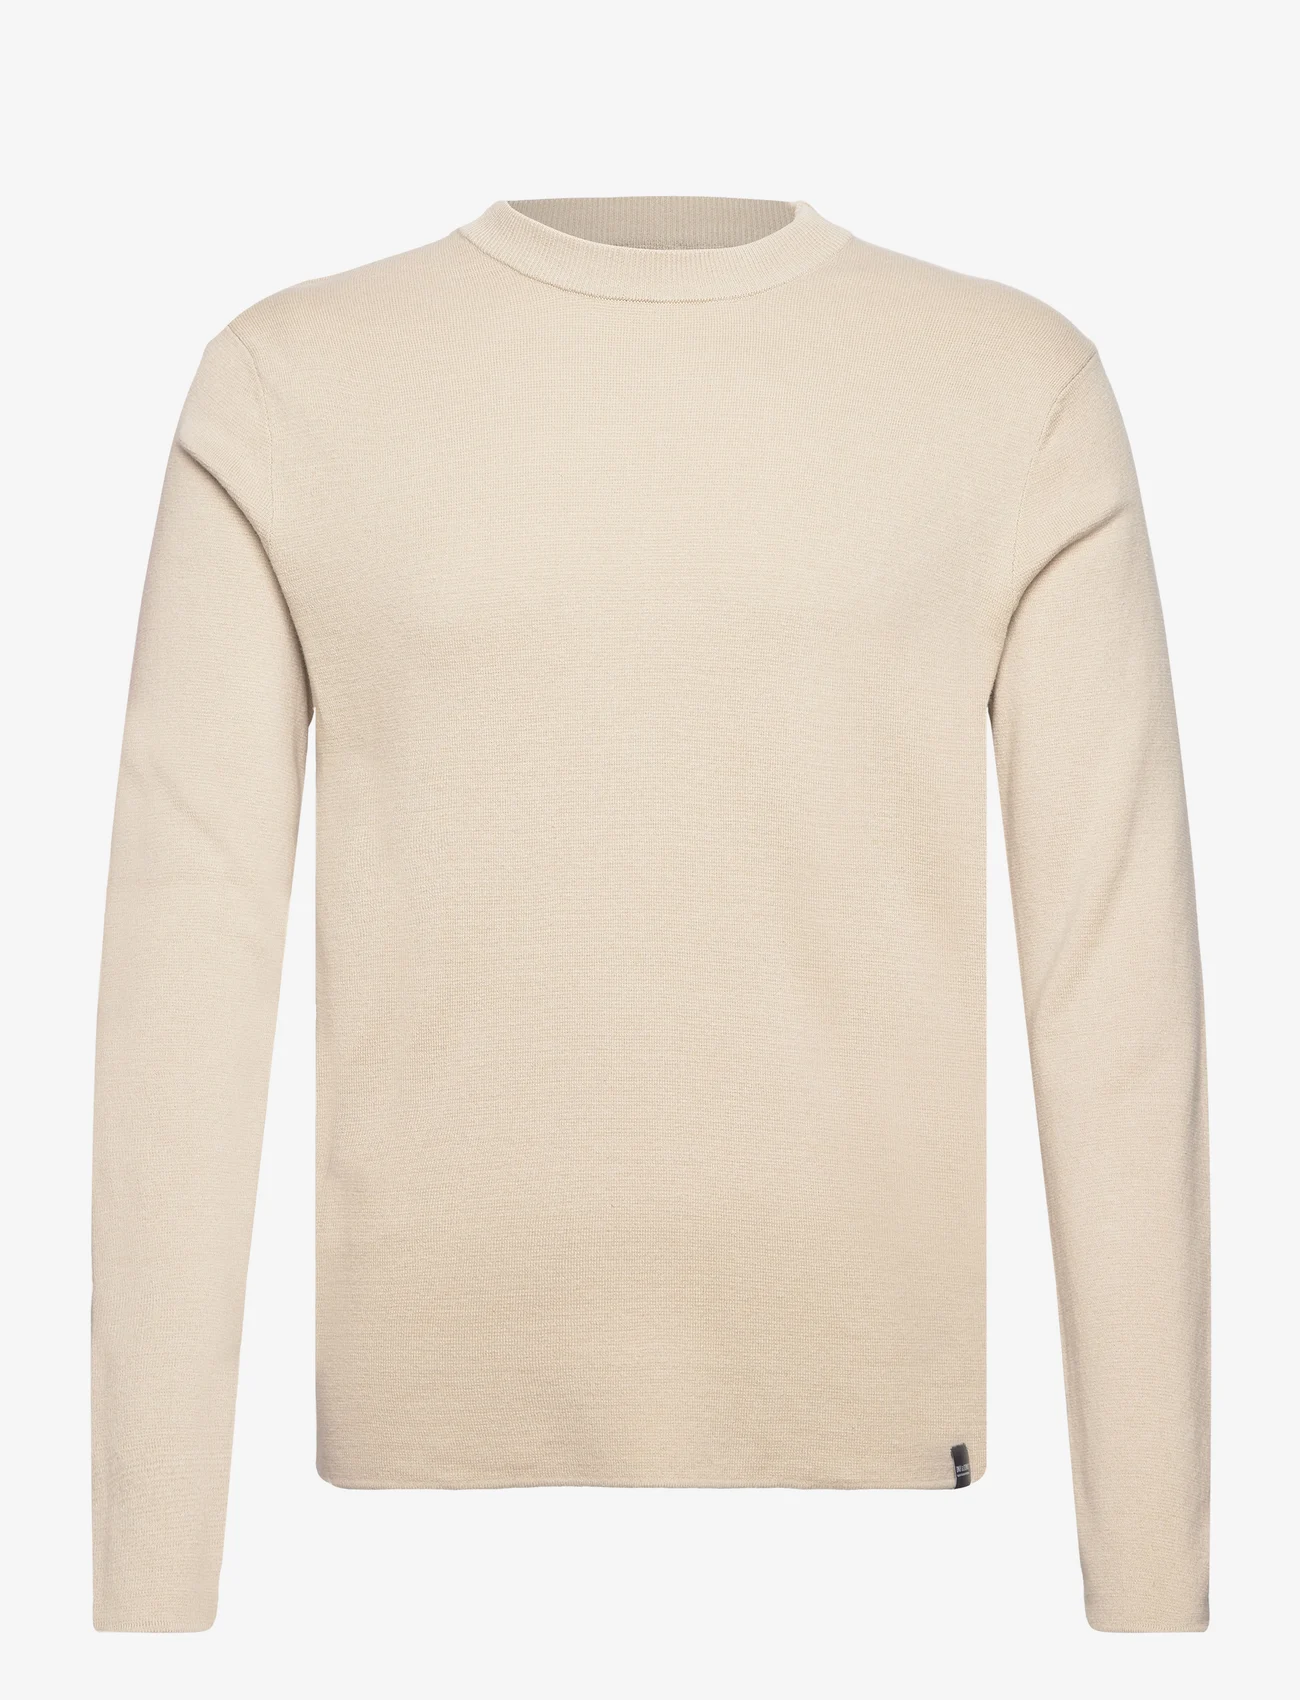 ONLY & SONS - ONSLUKE REG 14 CREW NECK KNIT - lowest prices - silver lining - 0